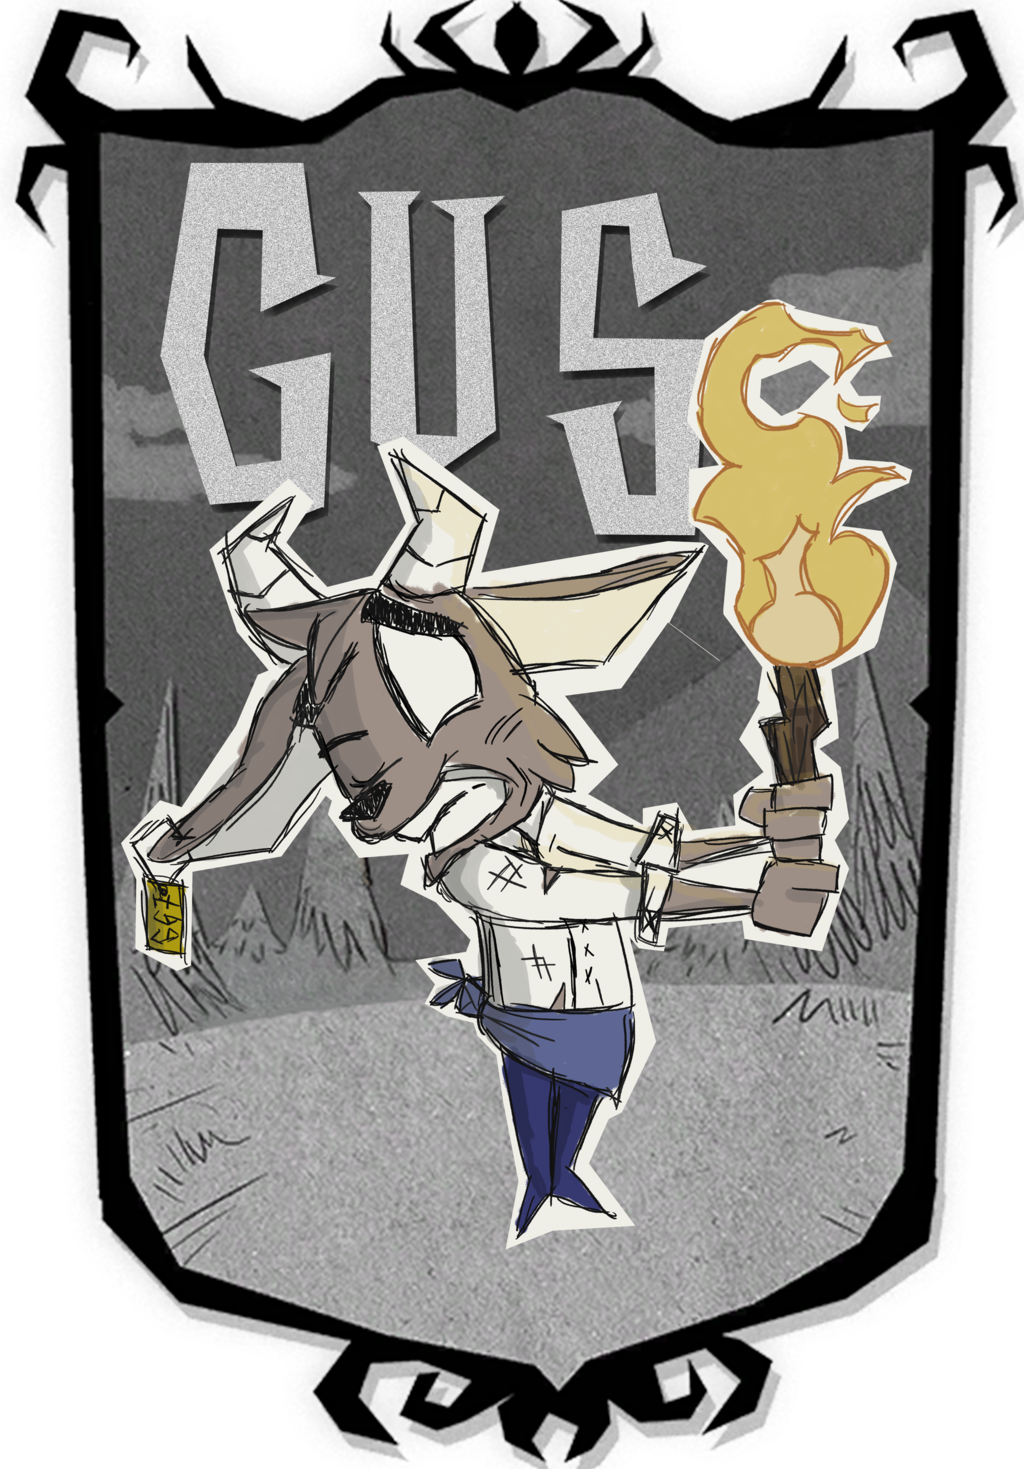 Most recent image: Gus The Goat (Don't Starve)